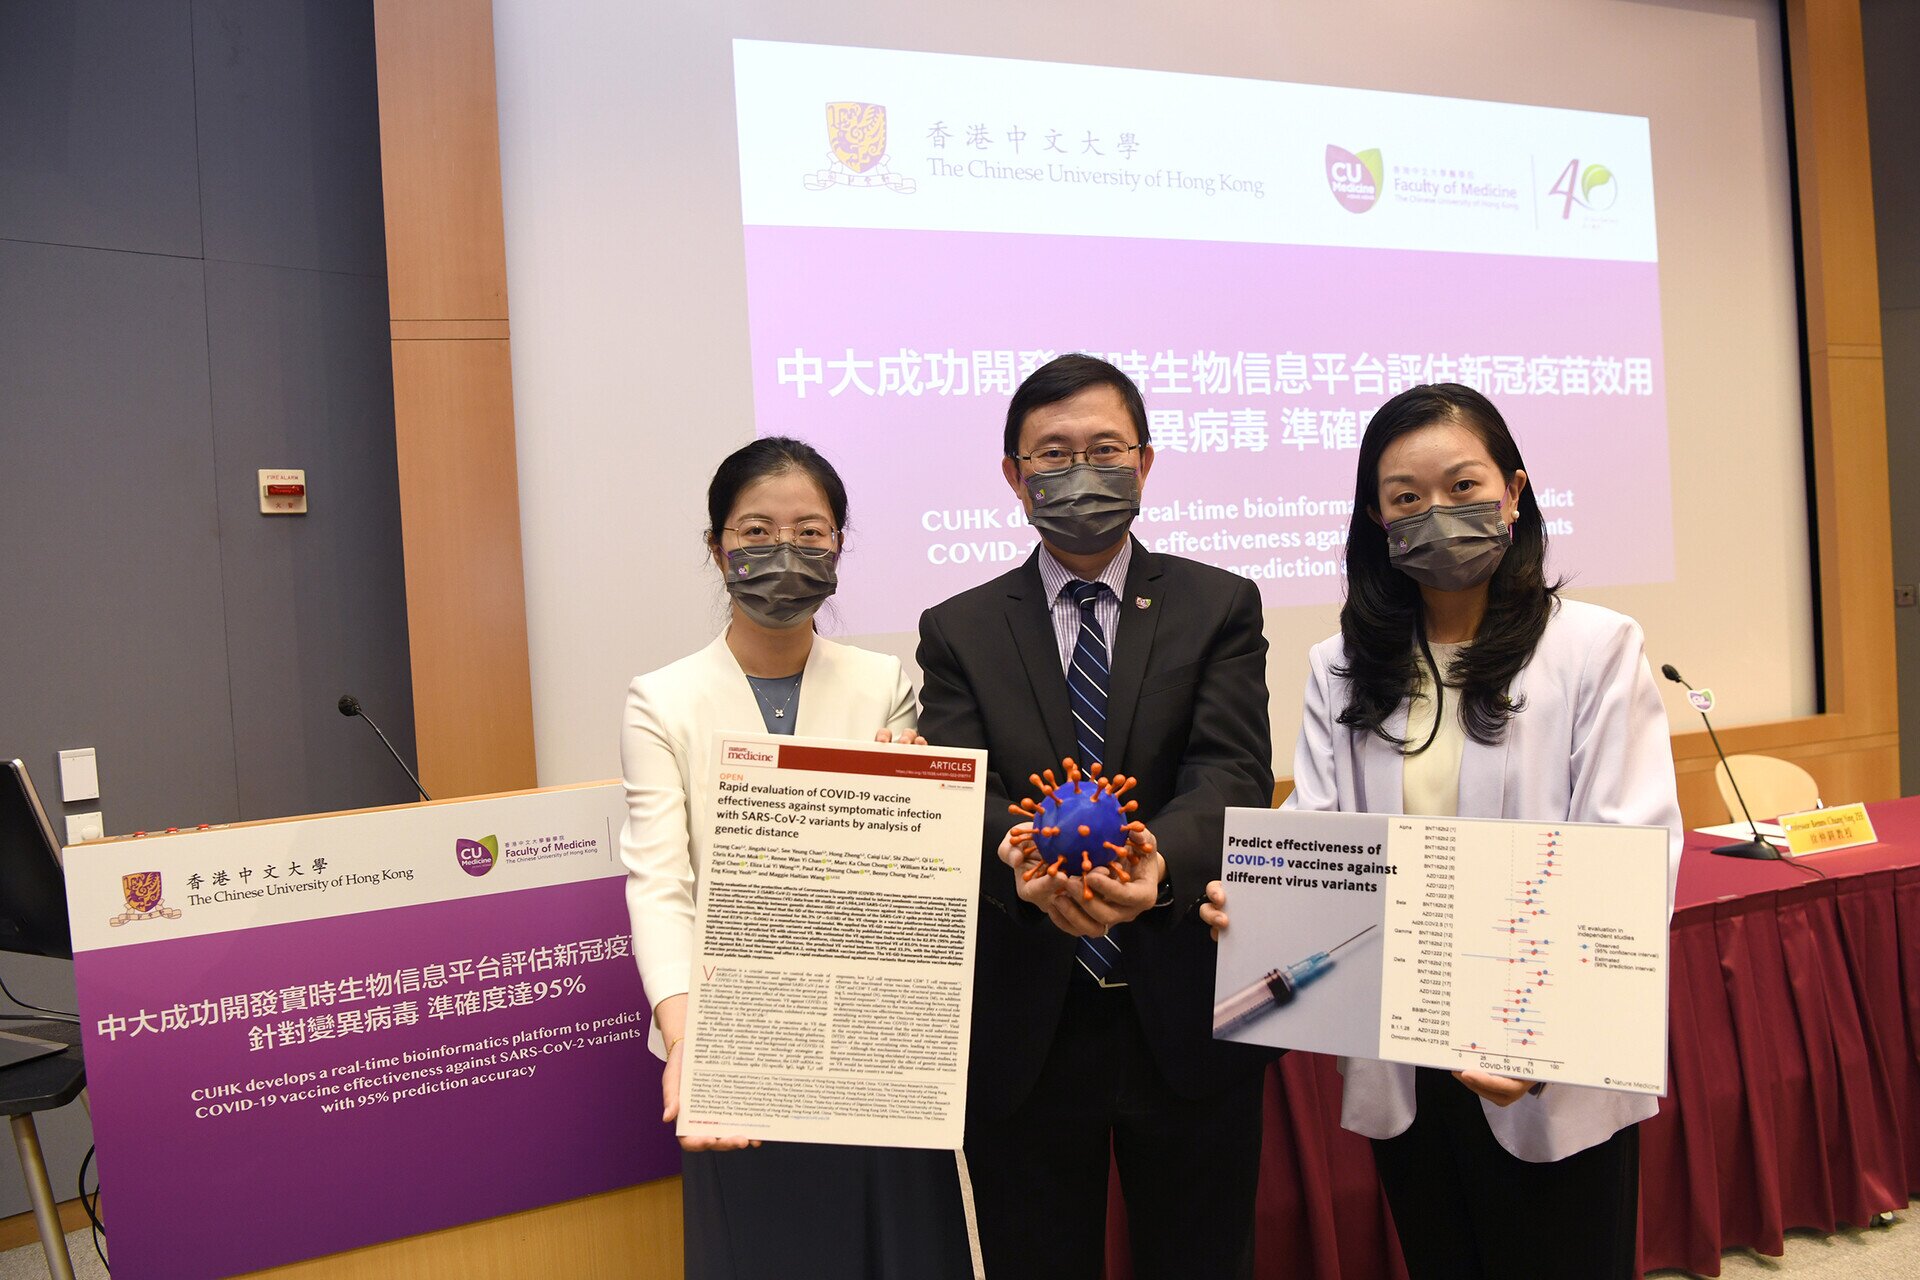 CUHK develops a real-time bioinformatics platform to predict COVID-19 vaccine effectiveness against SARS-CoV-2 variants with 95% accuracy